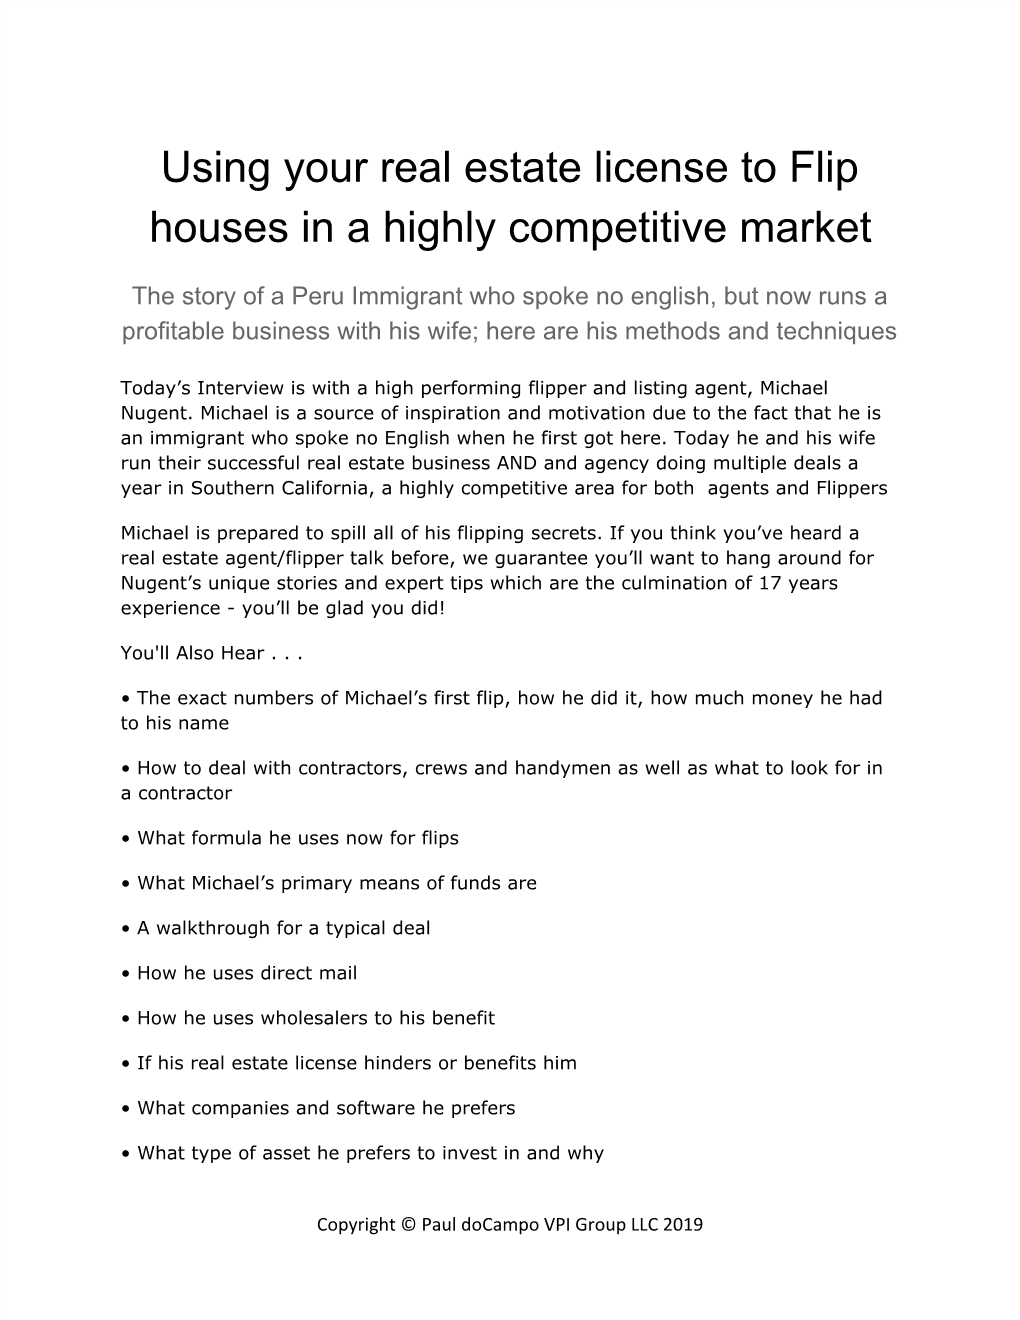 Using Your Real Estate License to Flip Houses in a Highly Competitive Market